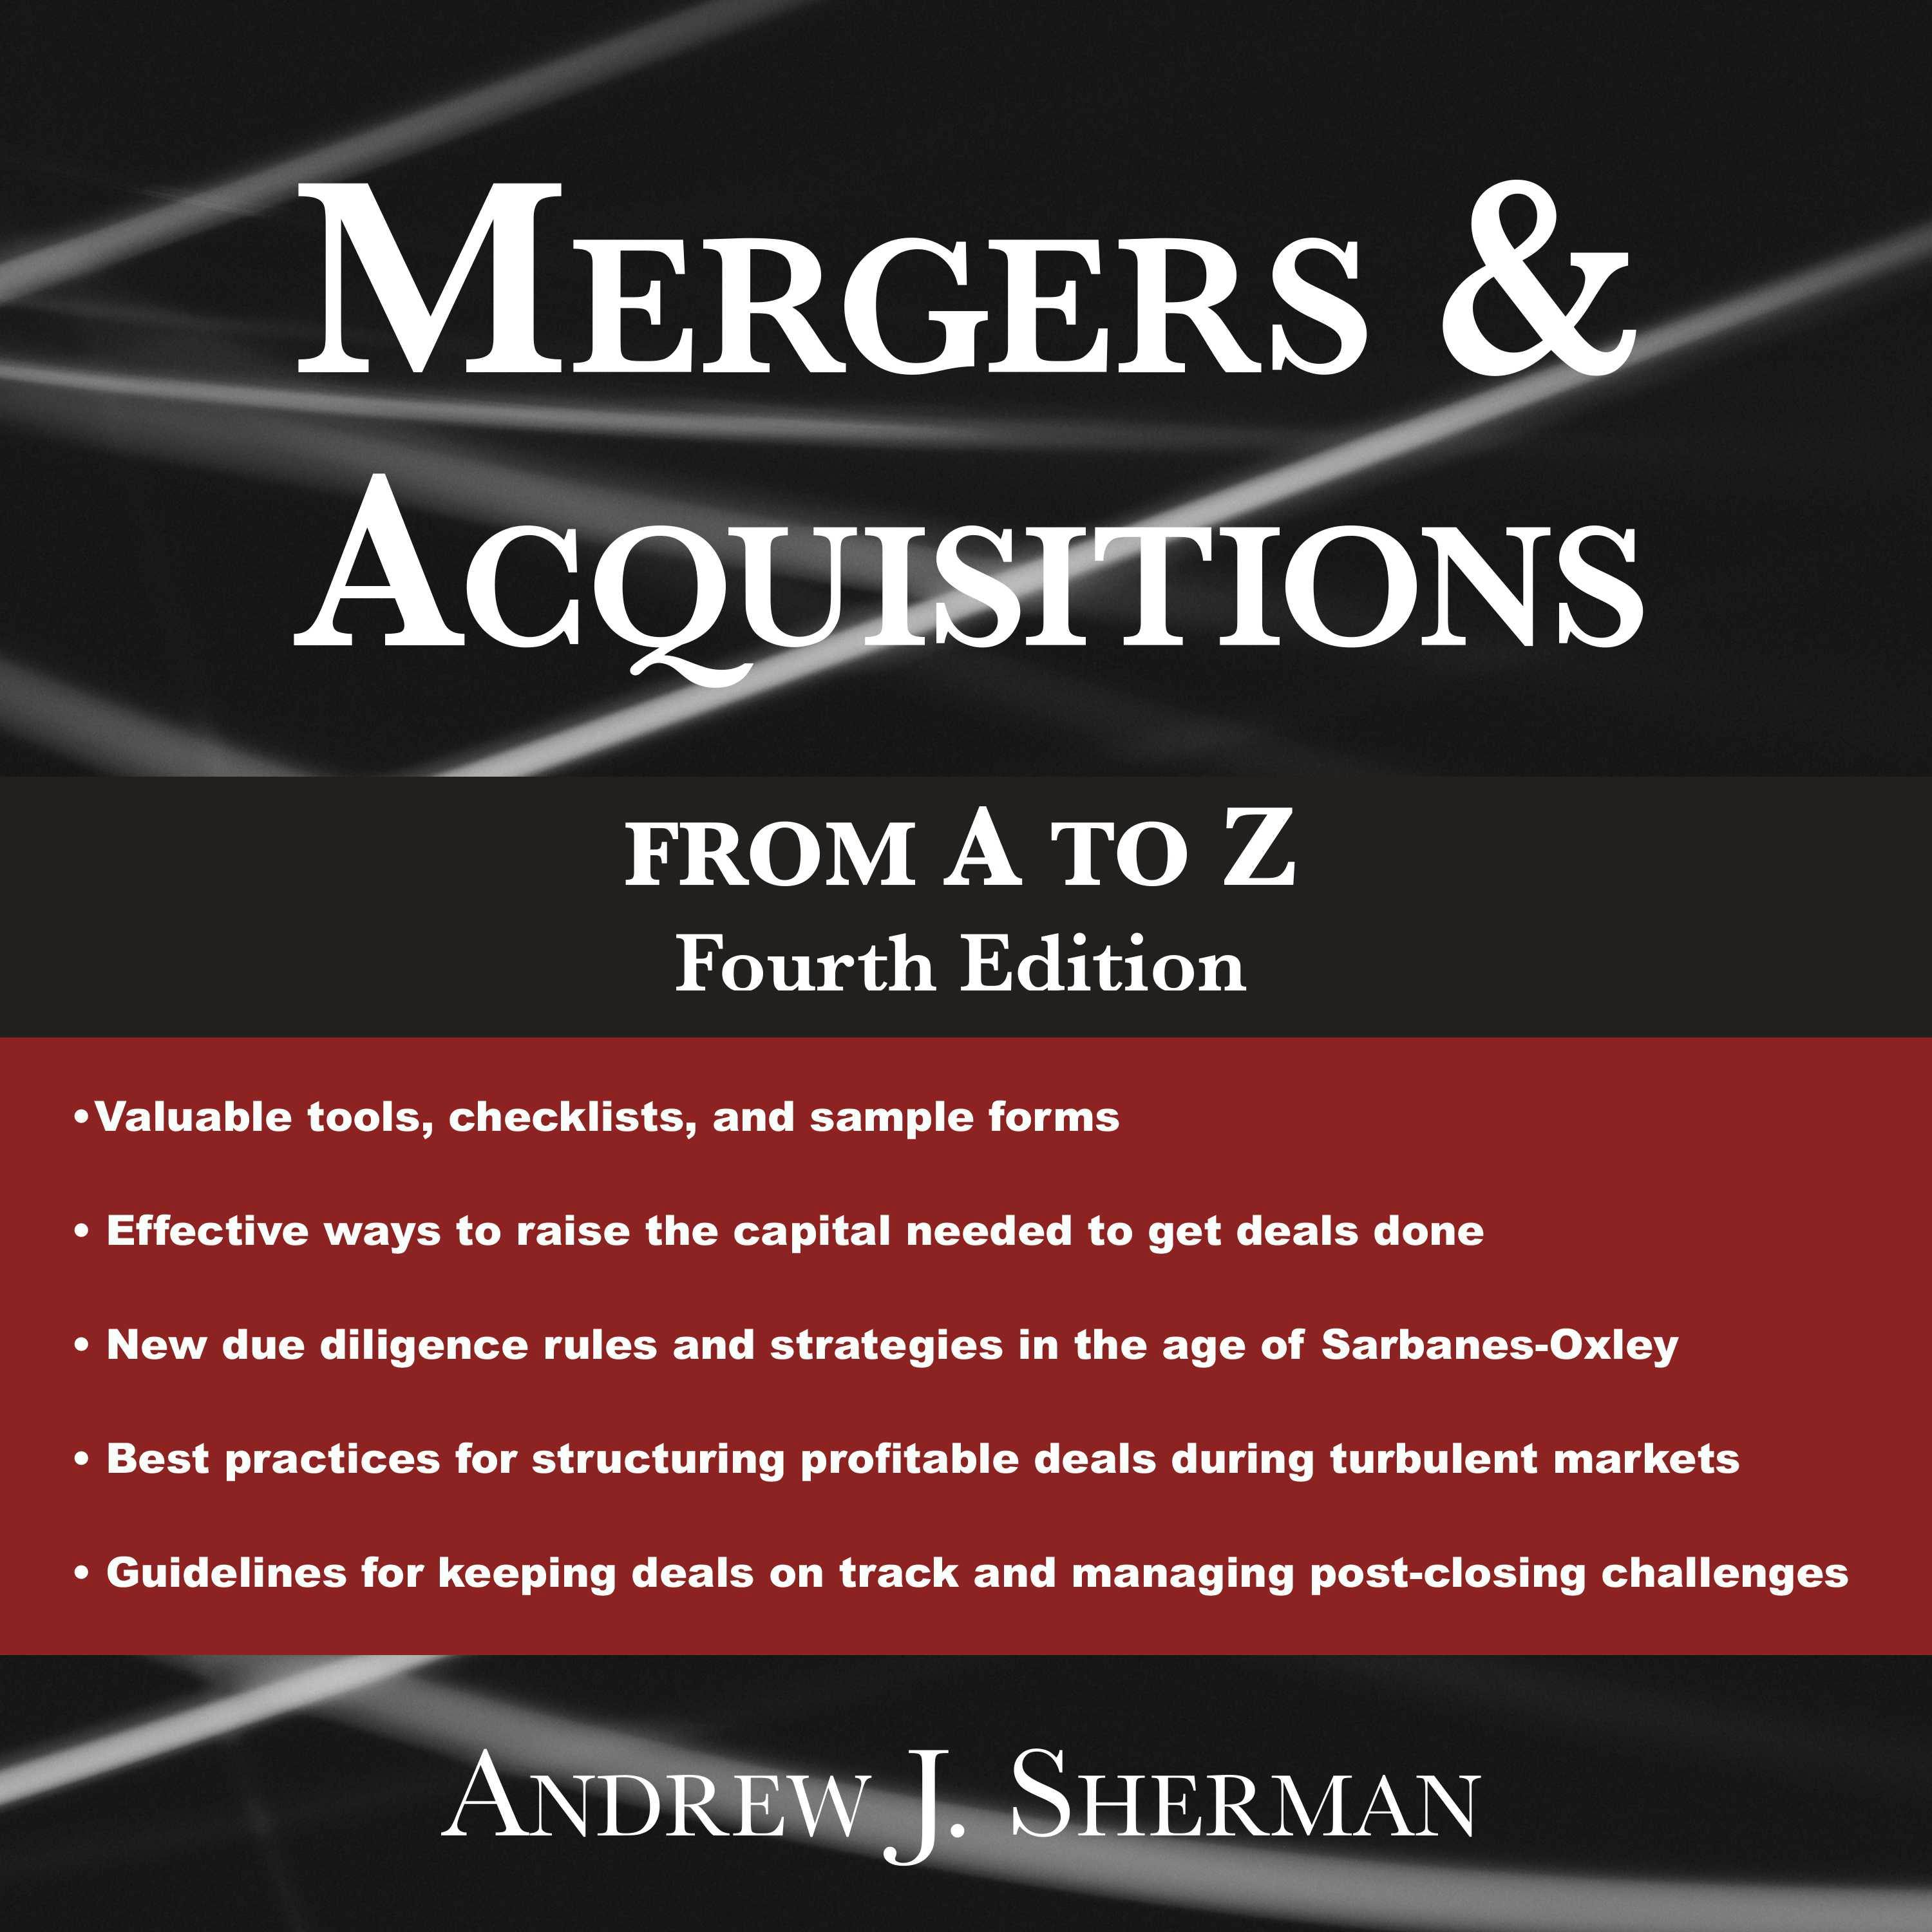 Mergers & Acquisitions from A to Z: Fourth Edition - Andrew J. Sherman